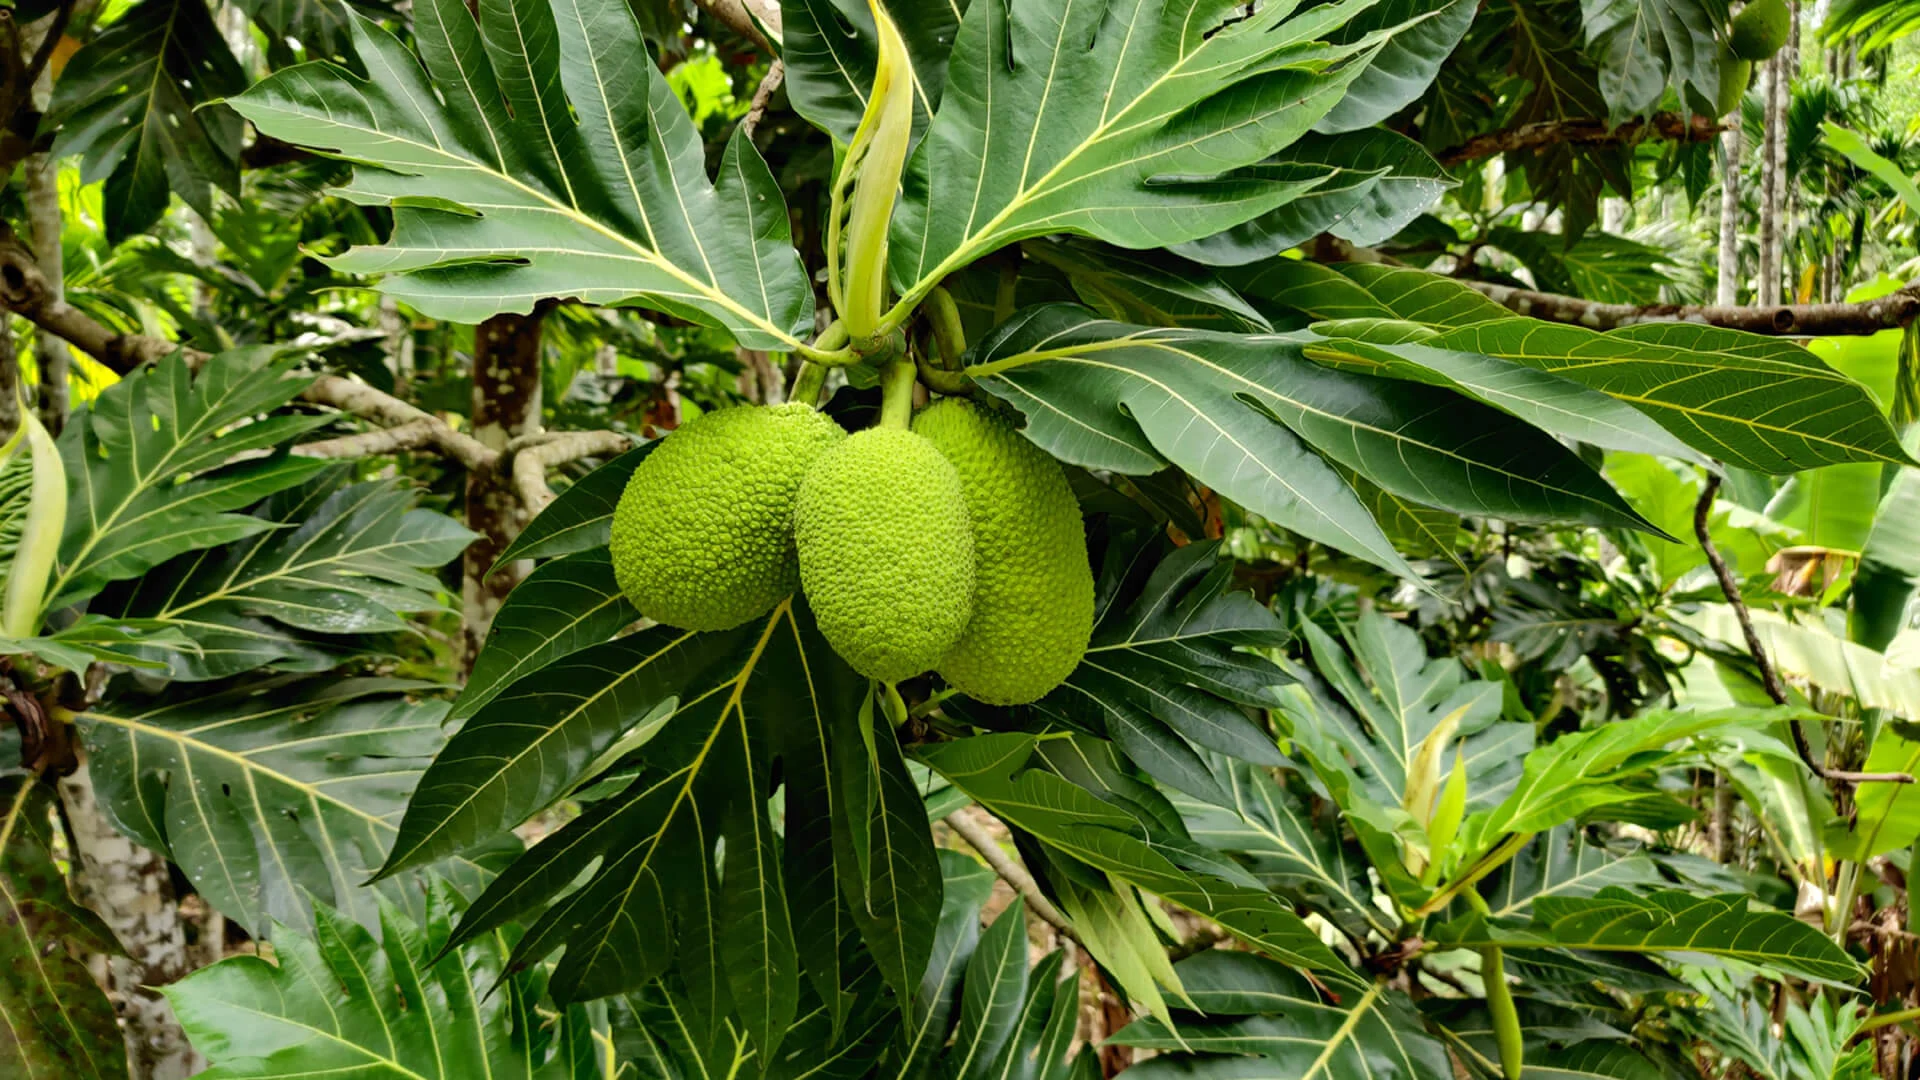 Scientists think this weird-looking, odd-smelling fruit holds the key to fighting world hunger as temperatures rise